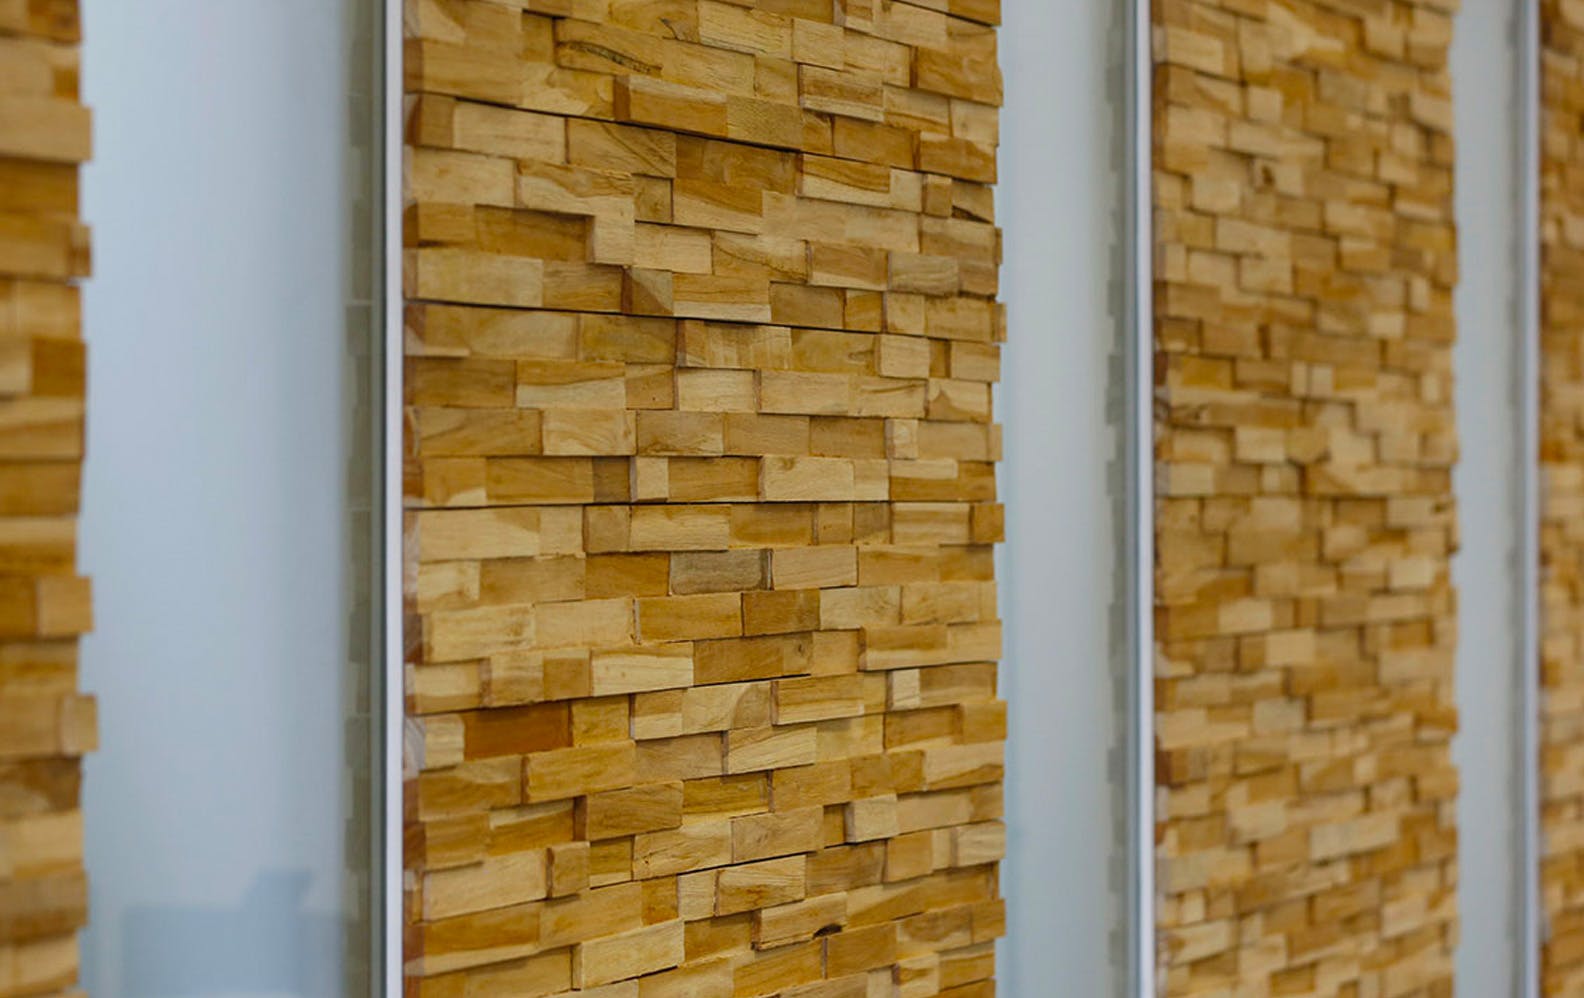 The door and surrounding wall surfaces -  finished in stacked timber blocks, creating texture and character.